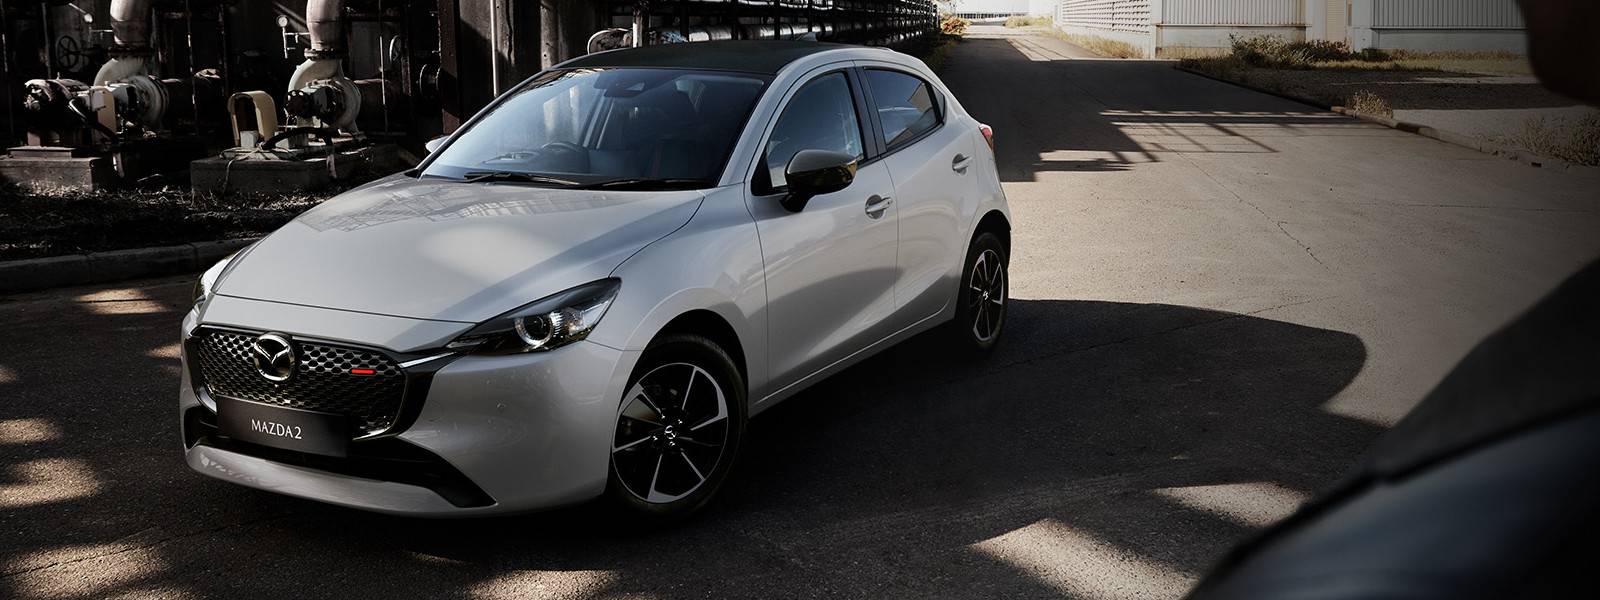 SHATTER ALL PRECONCEPTION WITH MAZDA2